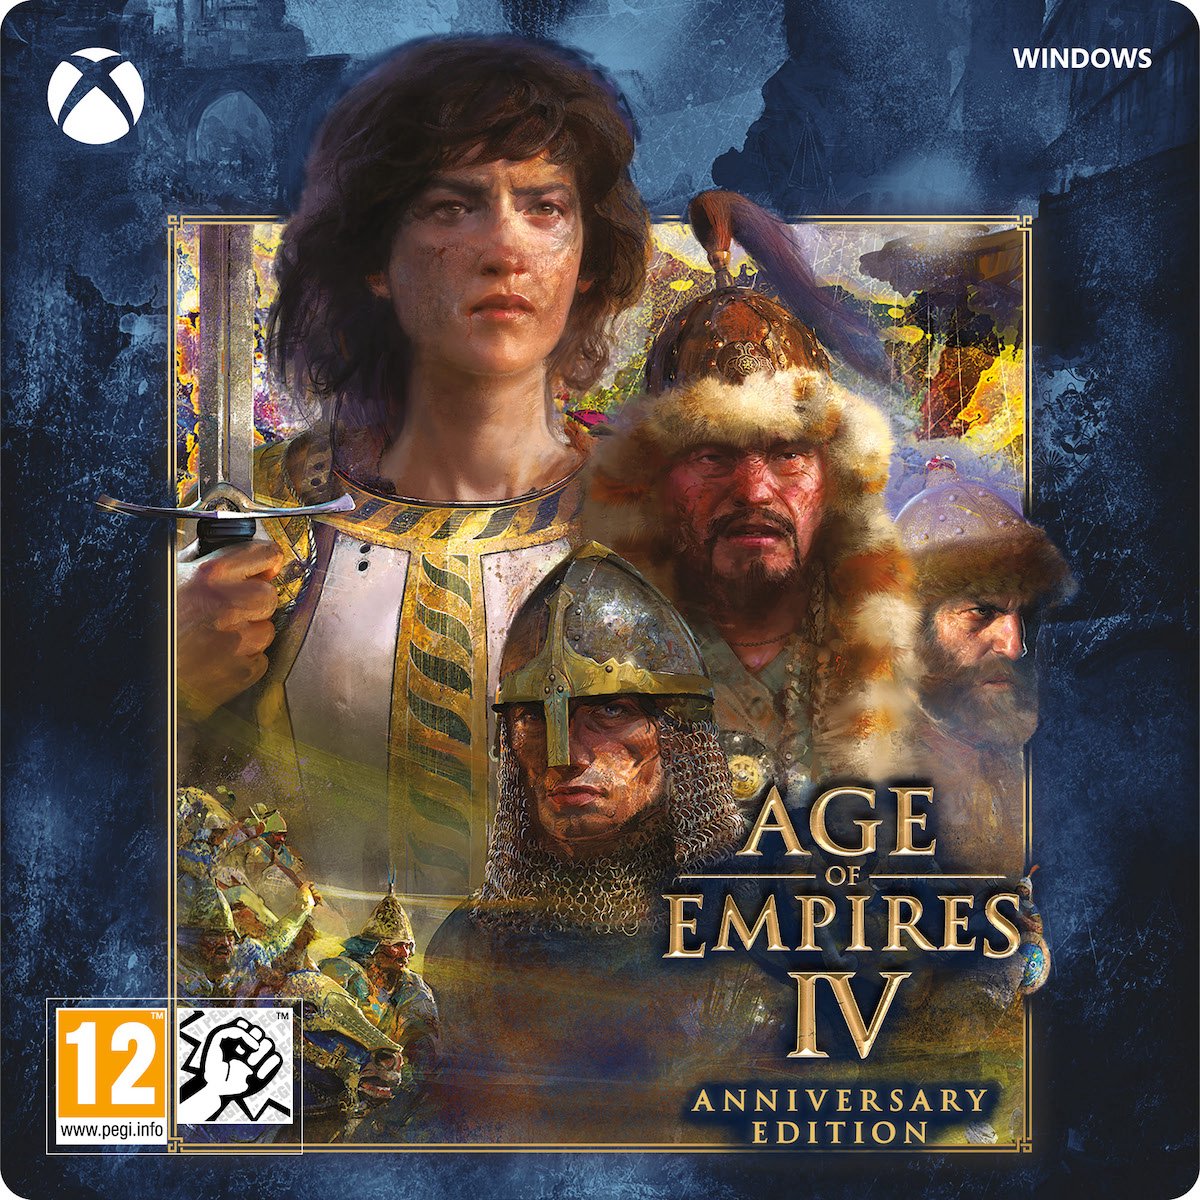 Age of Empires IV: Anniversary Edition - Windows Download - Xbox